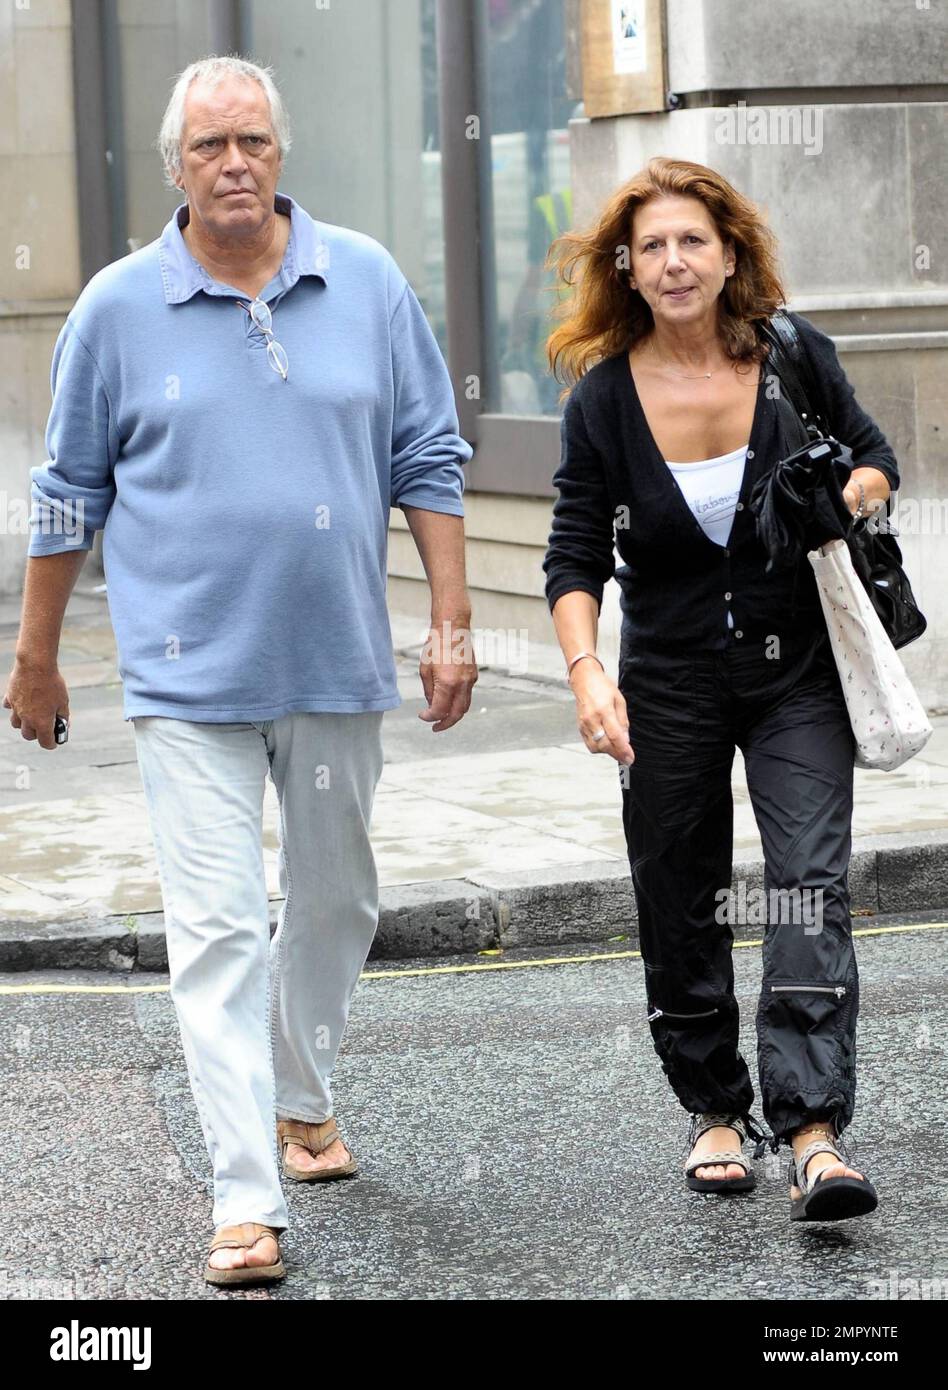 EXCLUSIVE!! Singer Elkie Brooks strolls in the West End with husband Trevor  Jordan, her long-time recording engineer. Brooks is preparing to being her  50th Anniversary Tour. London, UK. 7/26/10 Stock Photo -